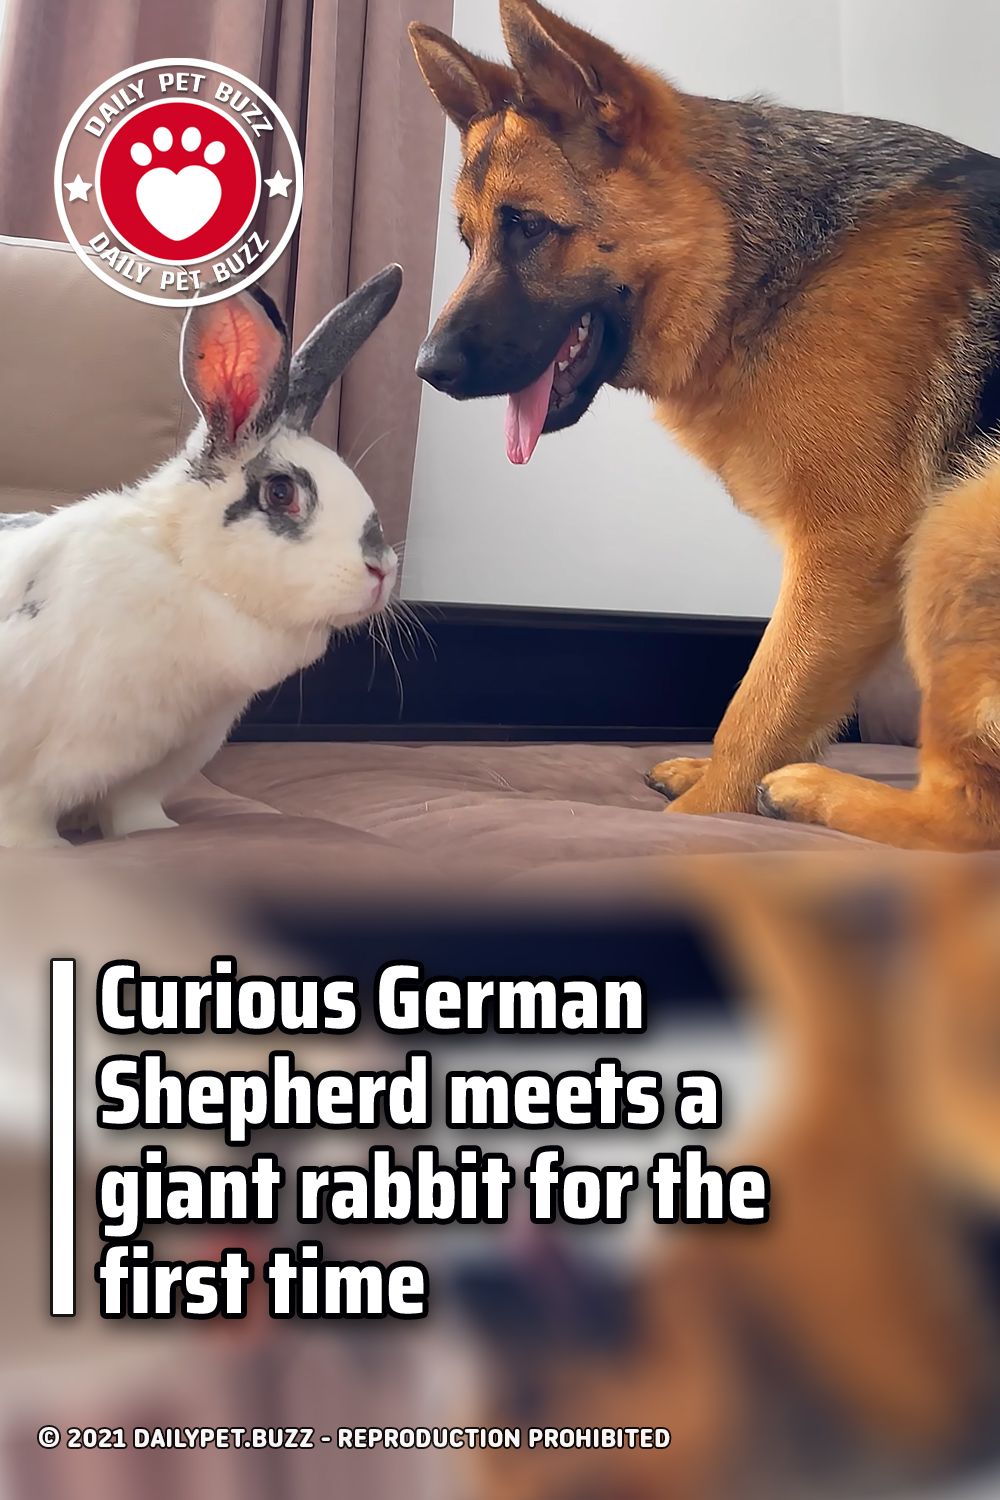 Curious German Shepherd meets a giant rabbit for the first time